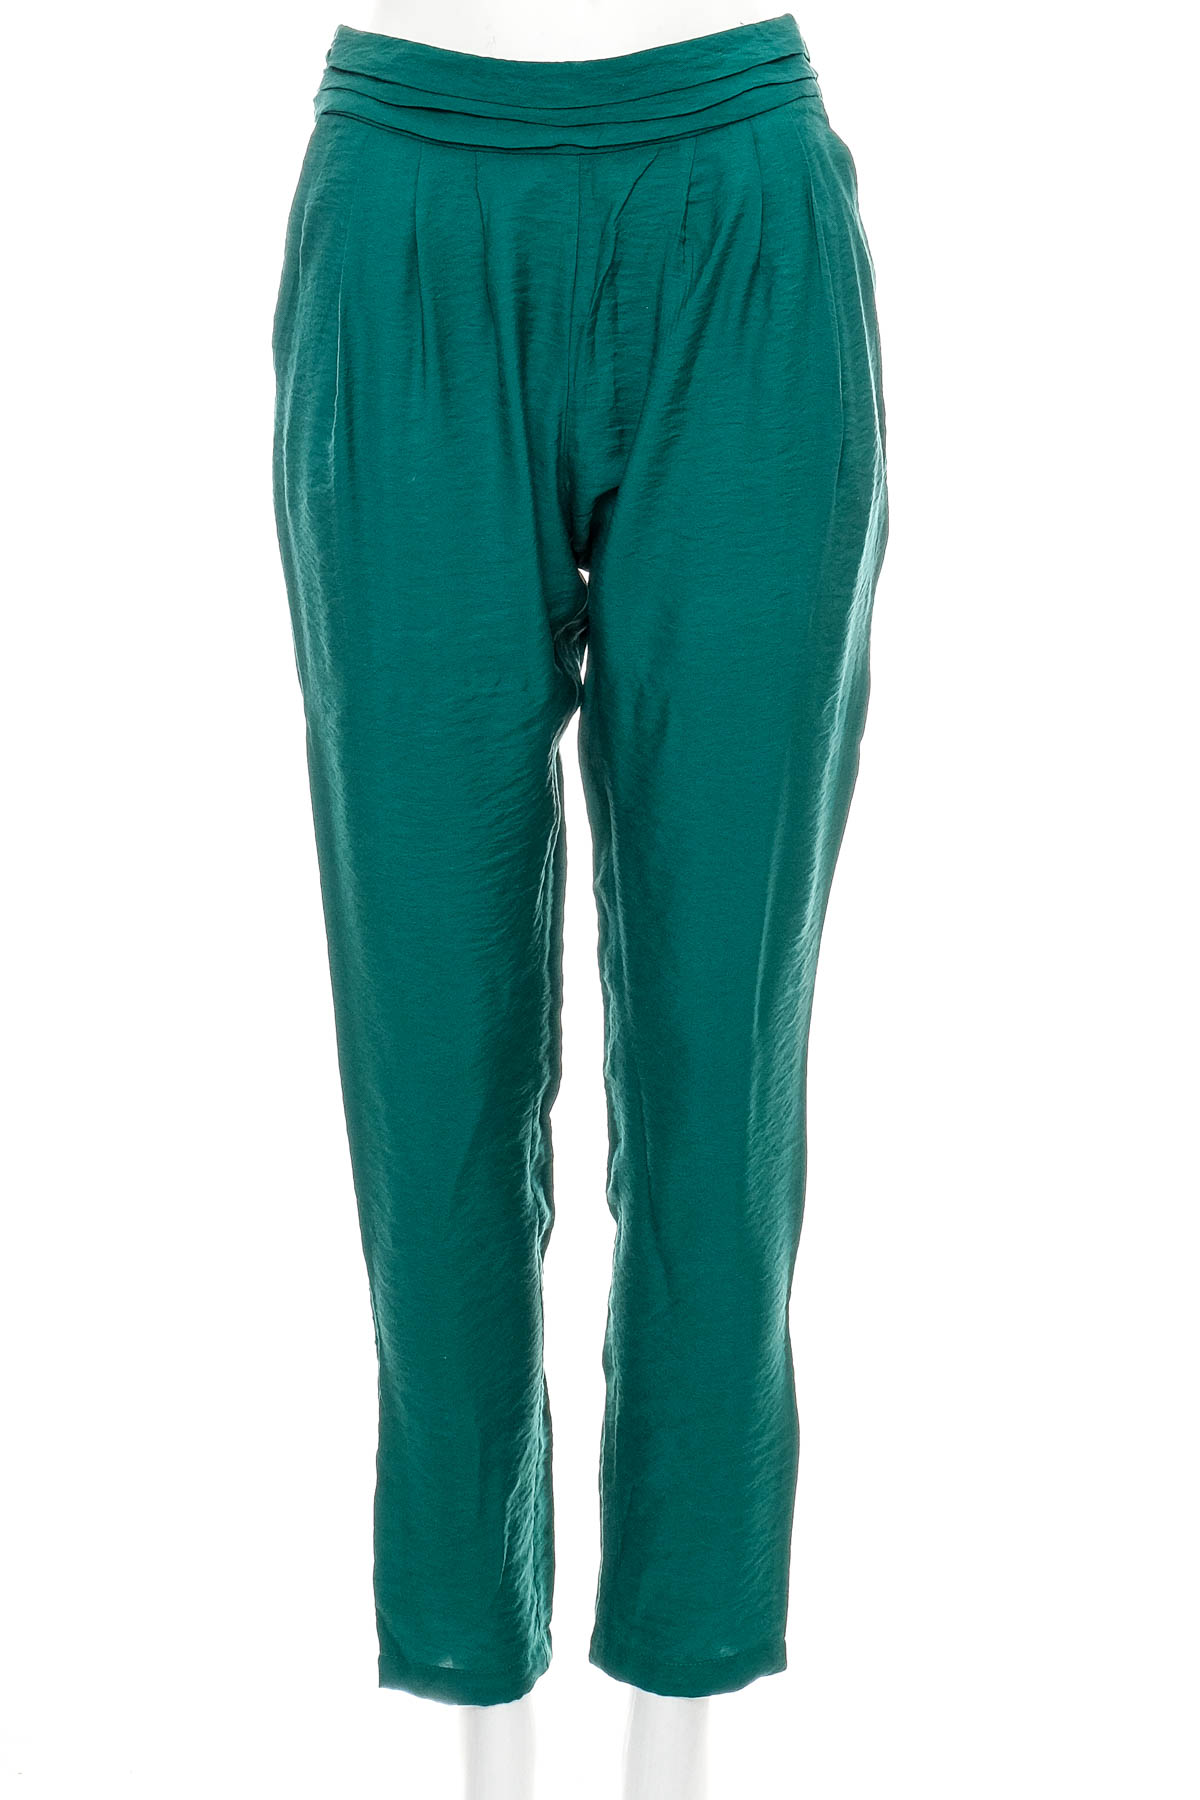 Women's trousers - MNG Collection - 0